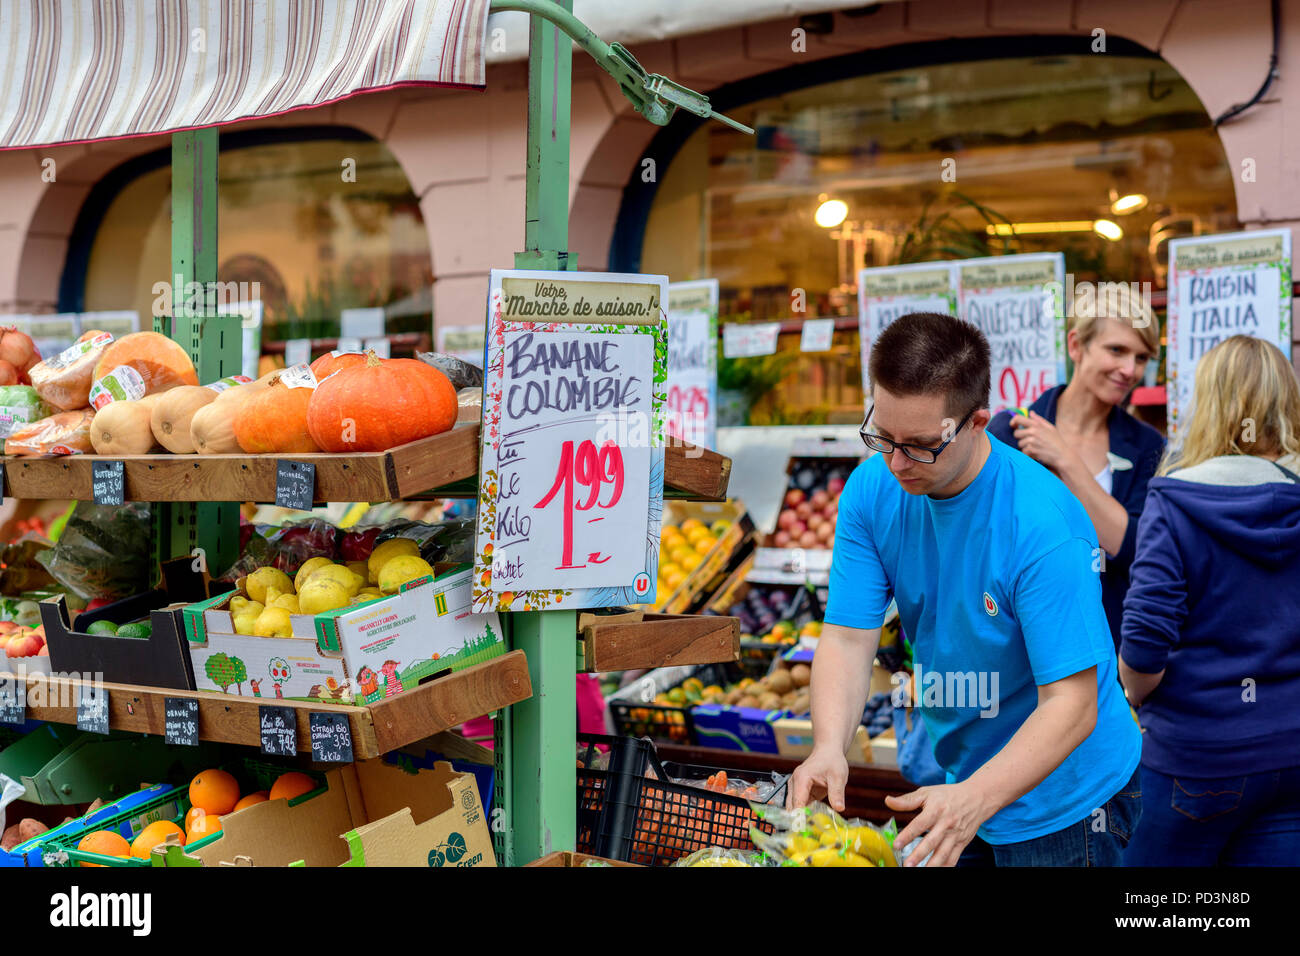 Shop assistant at grocery fruits stall, Strasbourg, Alsace, France, Europe, Stock Photo